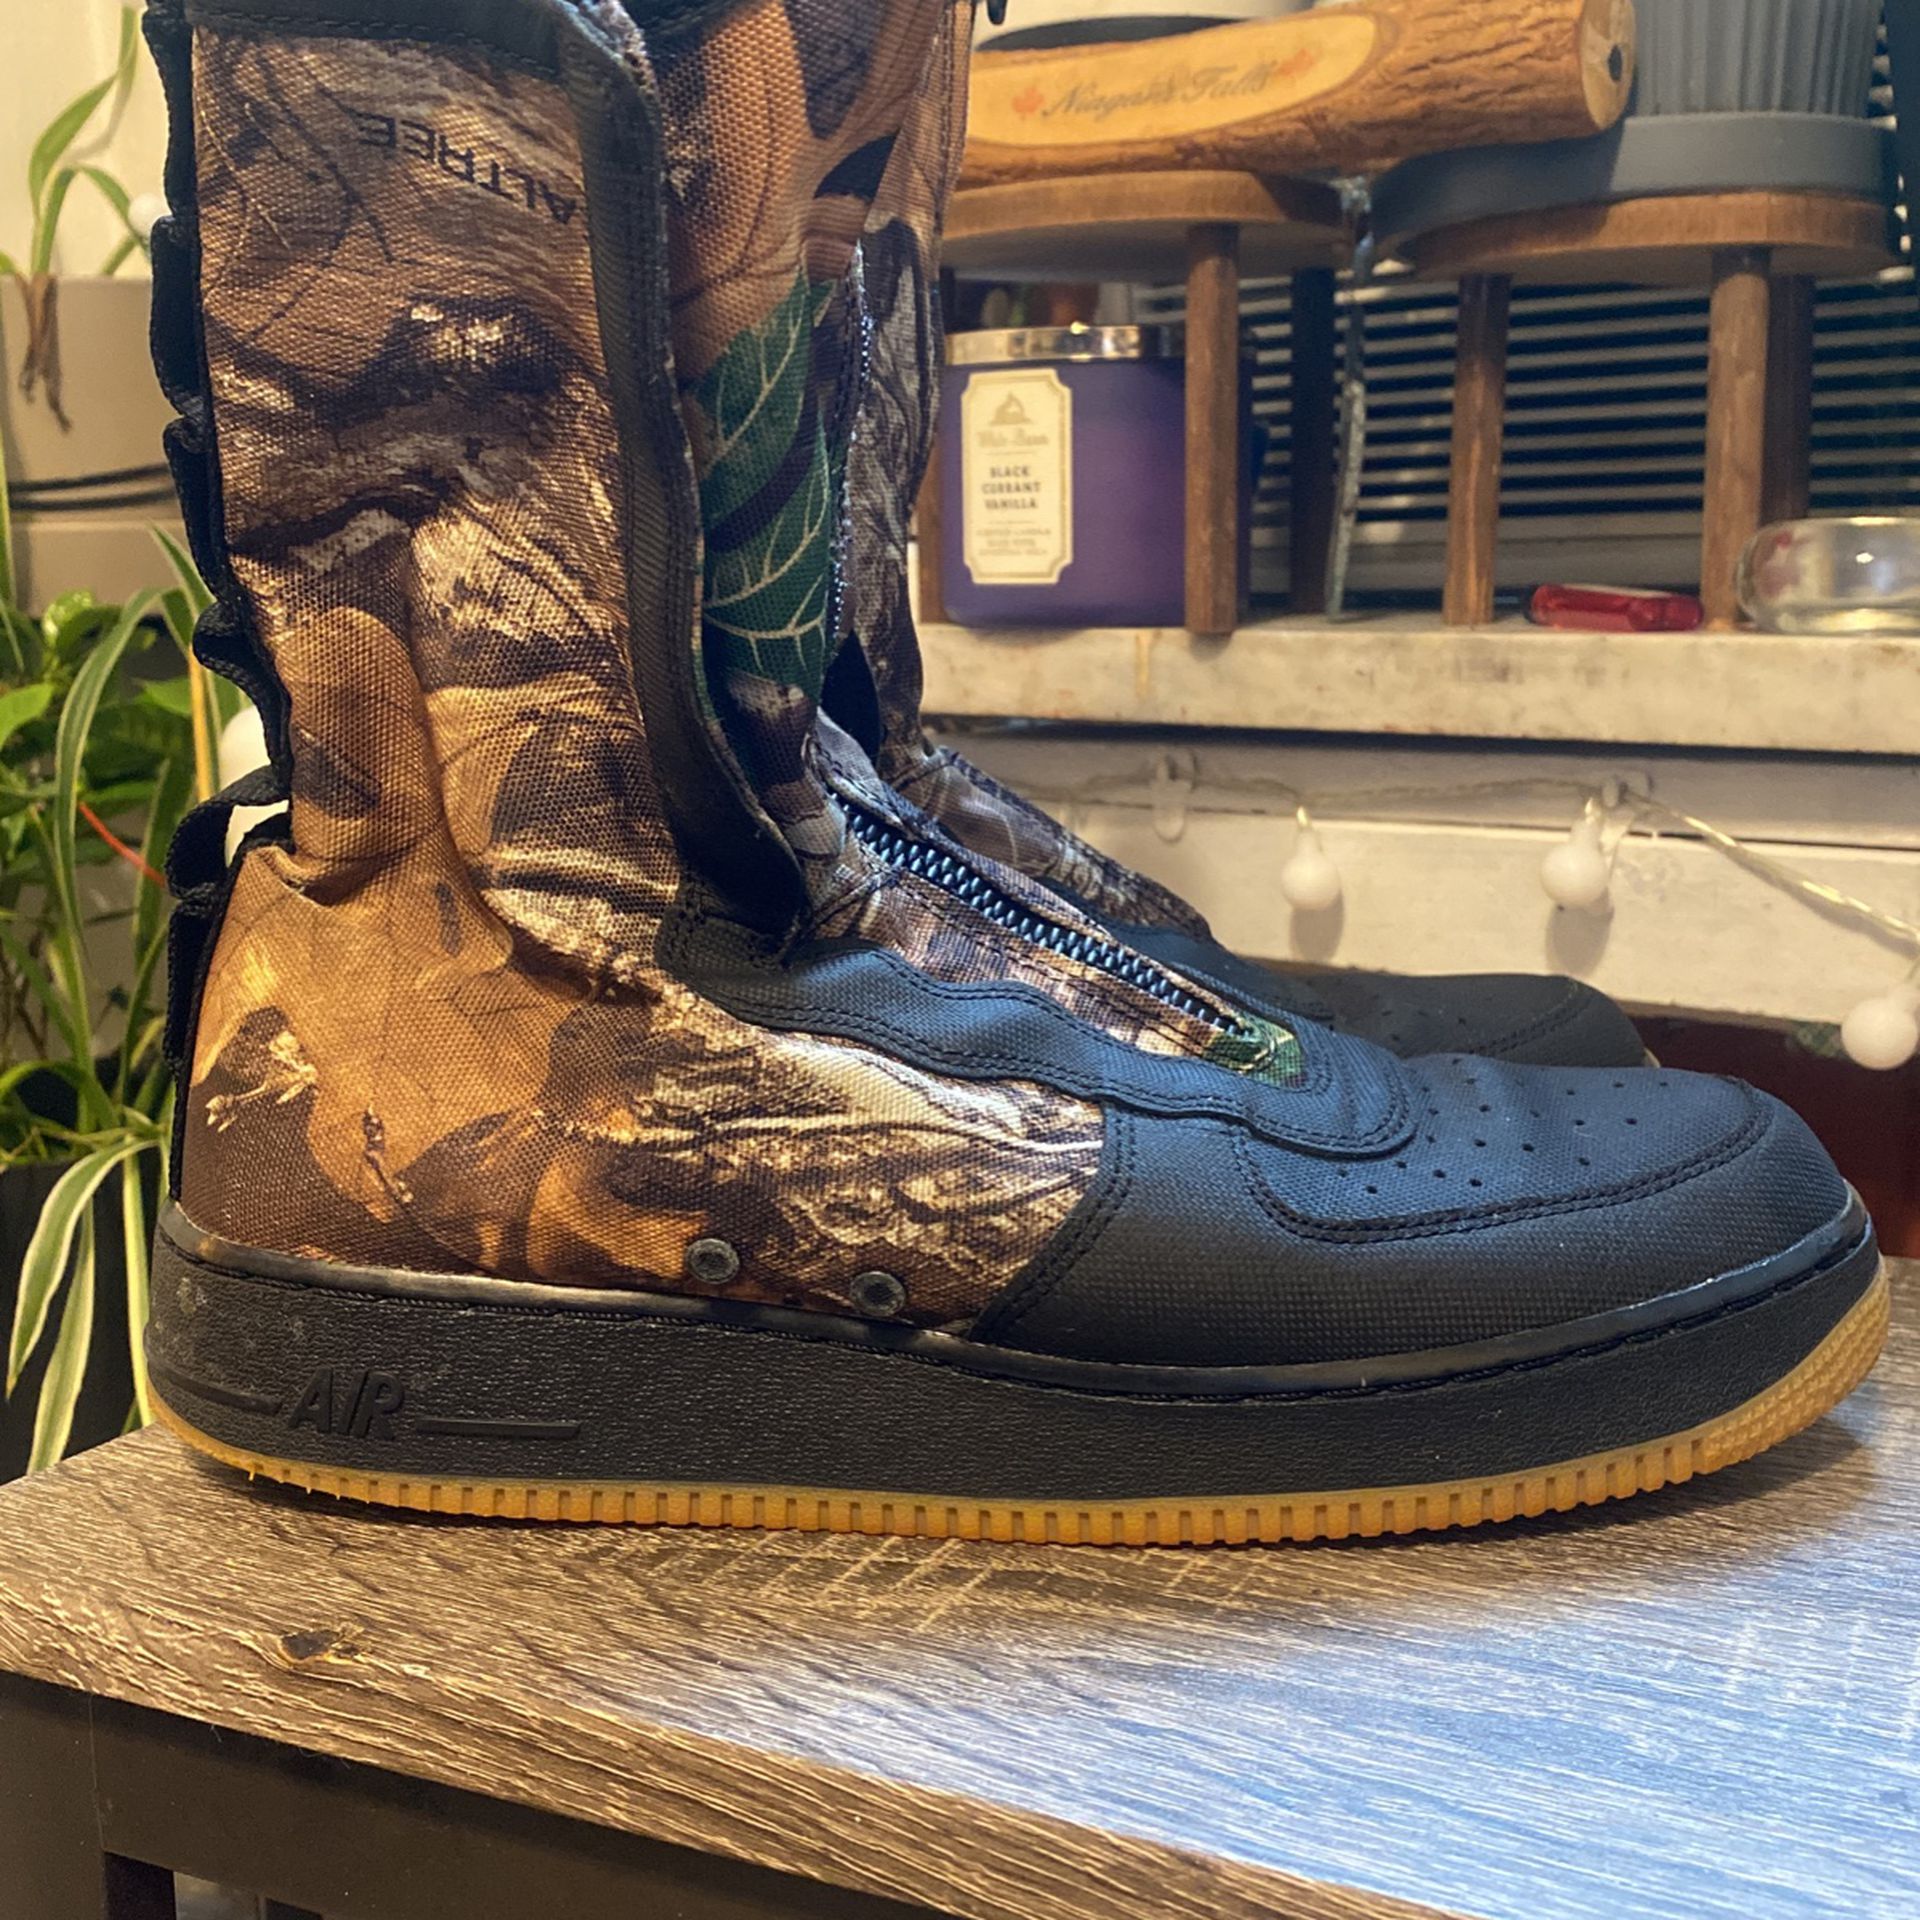 Used. Good Condition. Nike Air Force 1 SF AF1 Hi Camo Gum Boots Reflective for Sale in York, NY - OfferUp